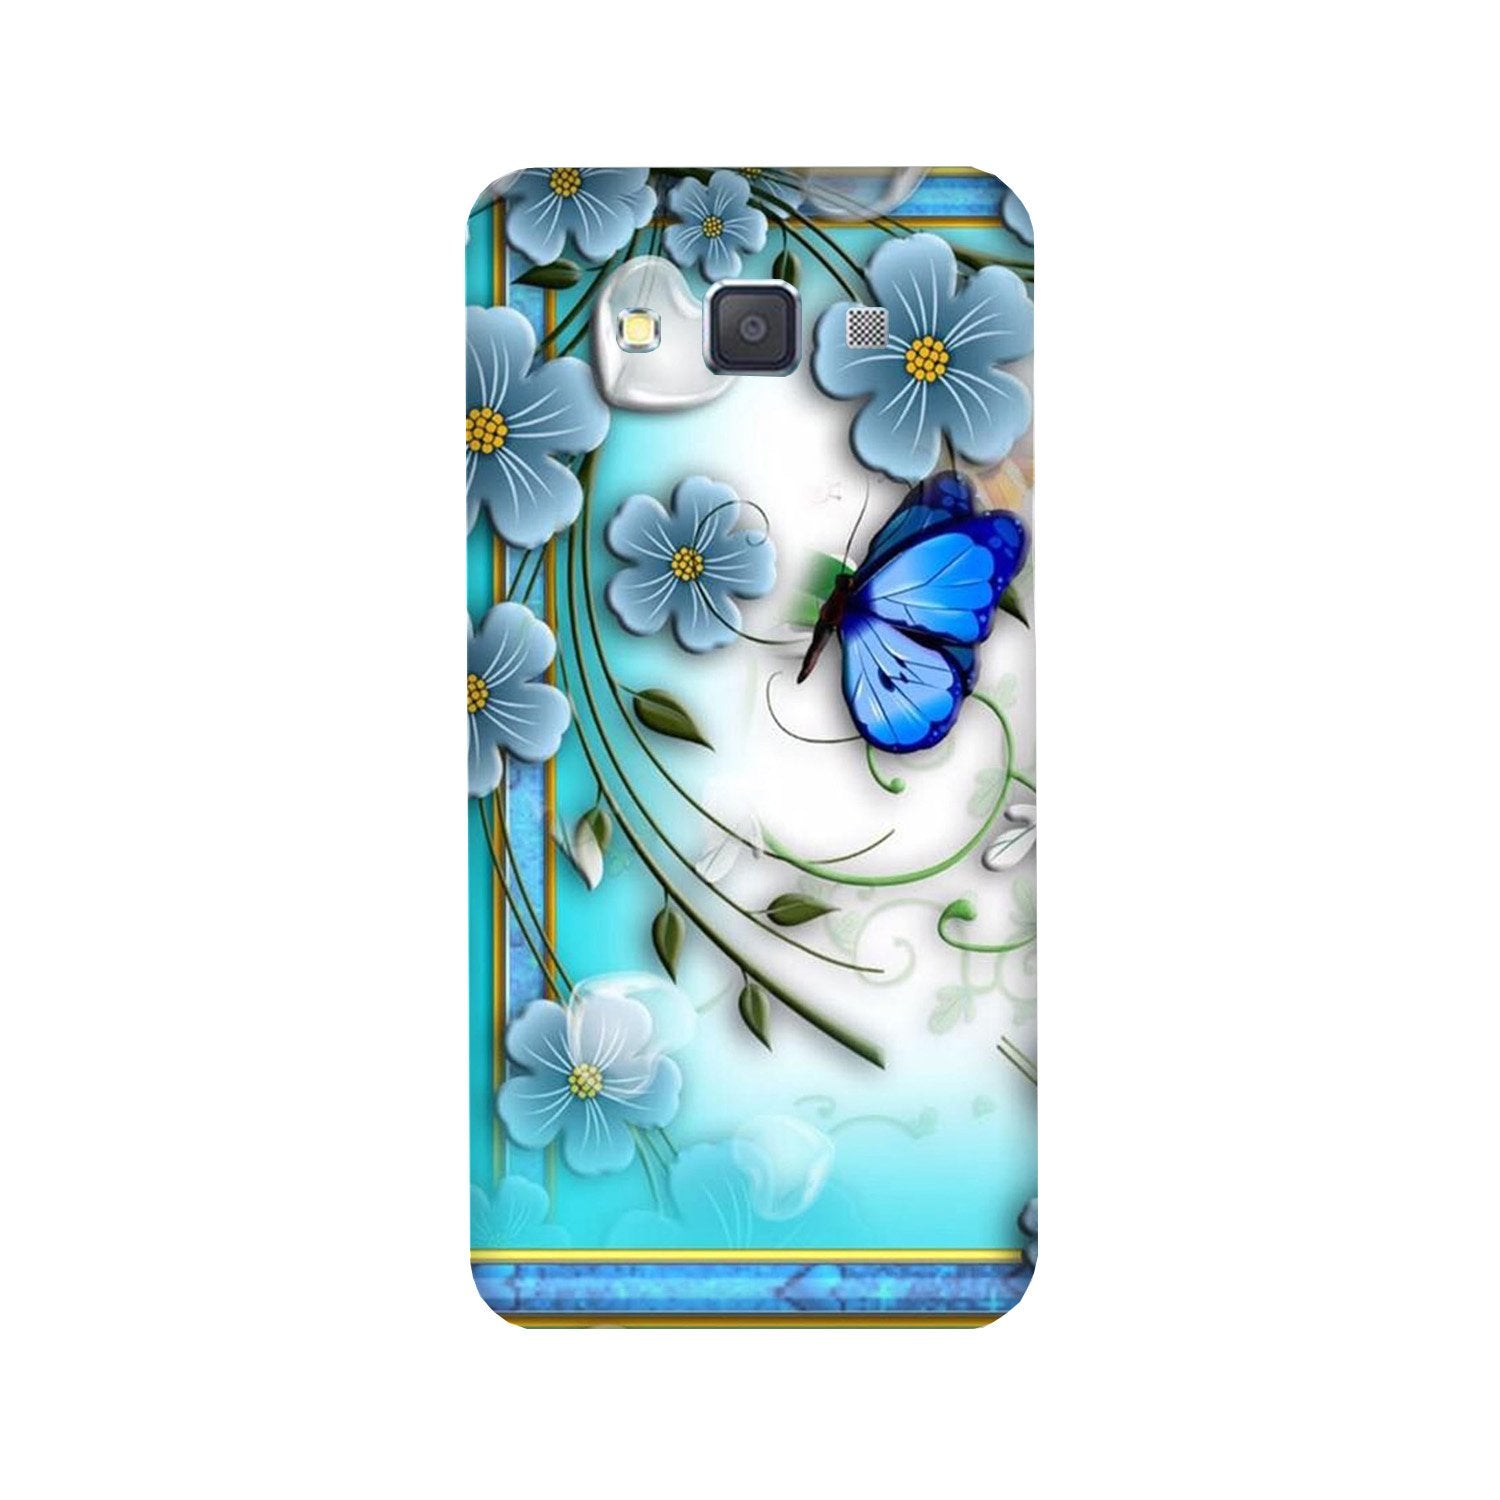 Blue Butterfly Case for Galaxy Grand 2